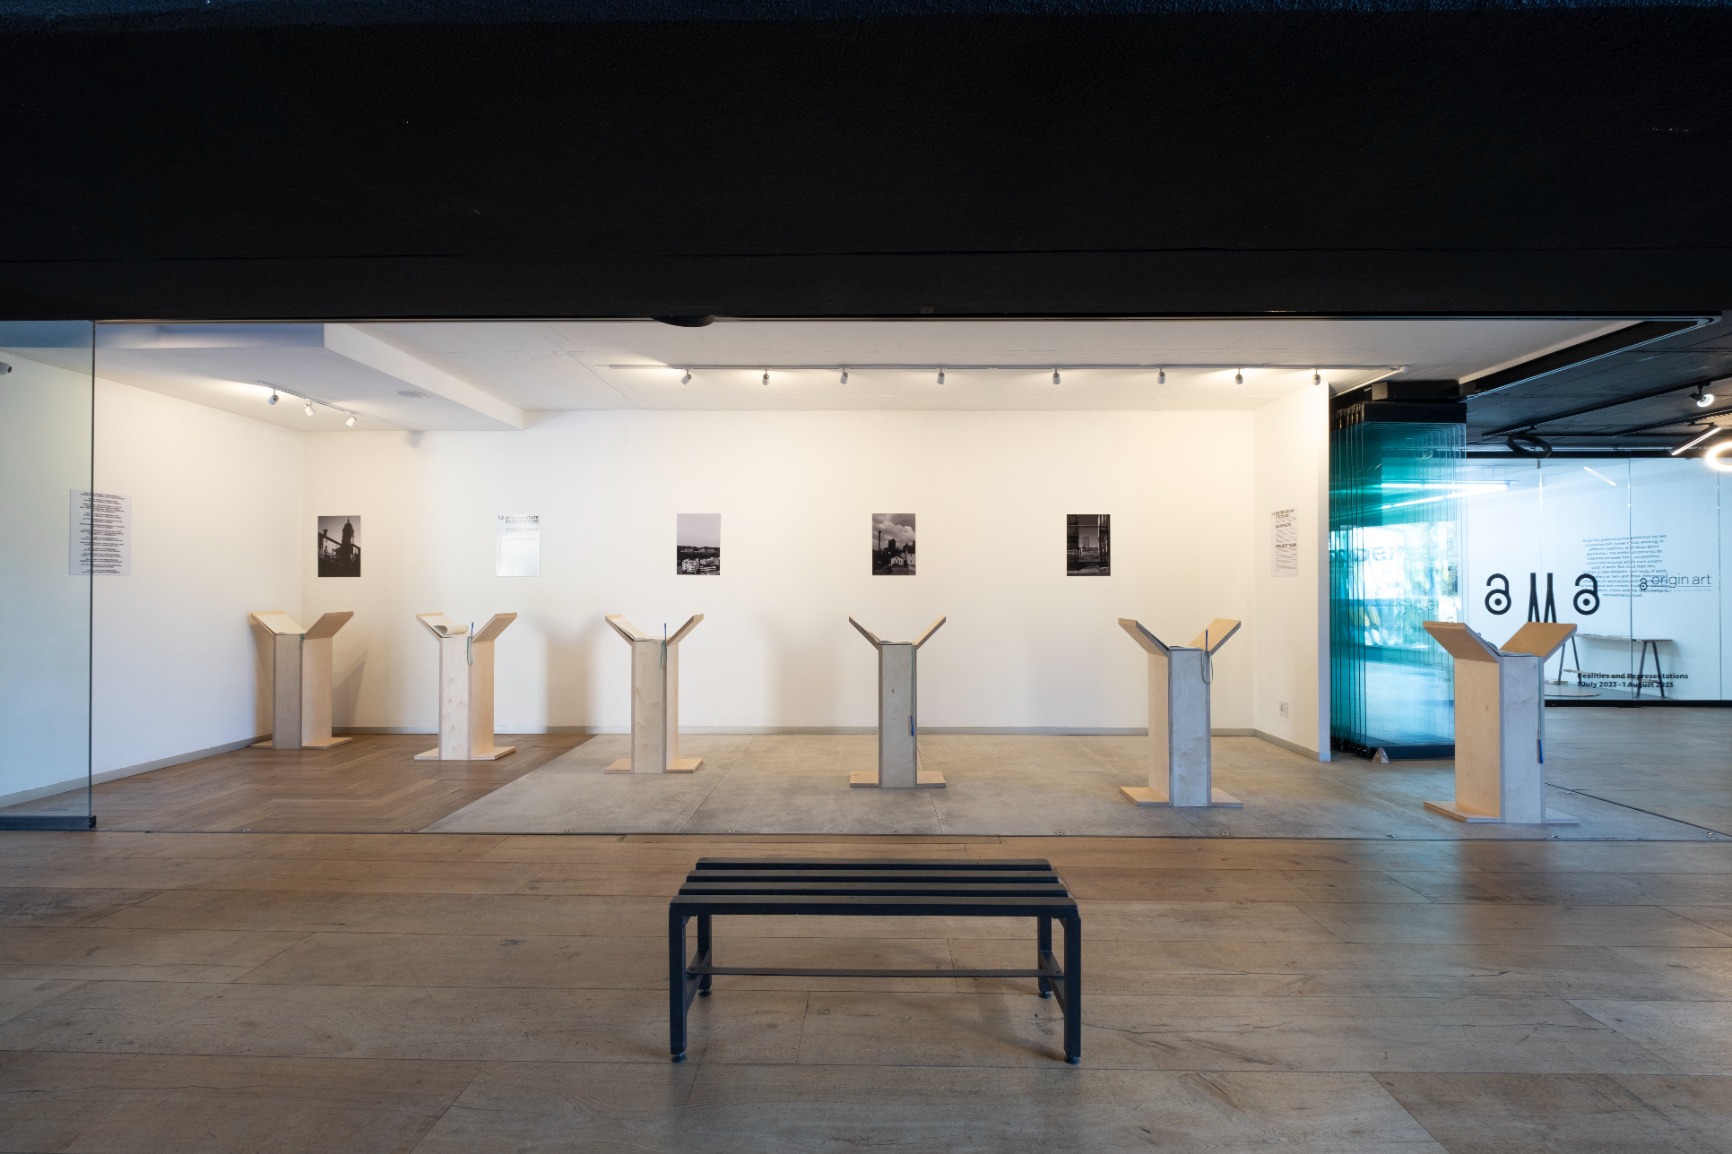 Photo of artwork. Artwork is a series of 6 timber podiums seen from afar in a gallery with photograohs on the wall.